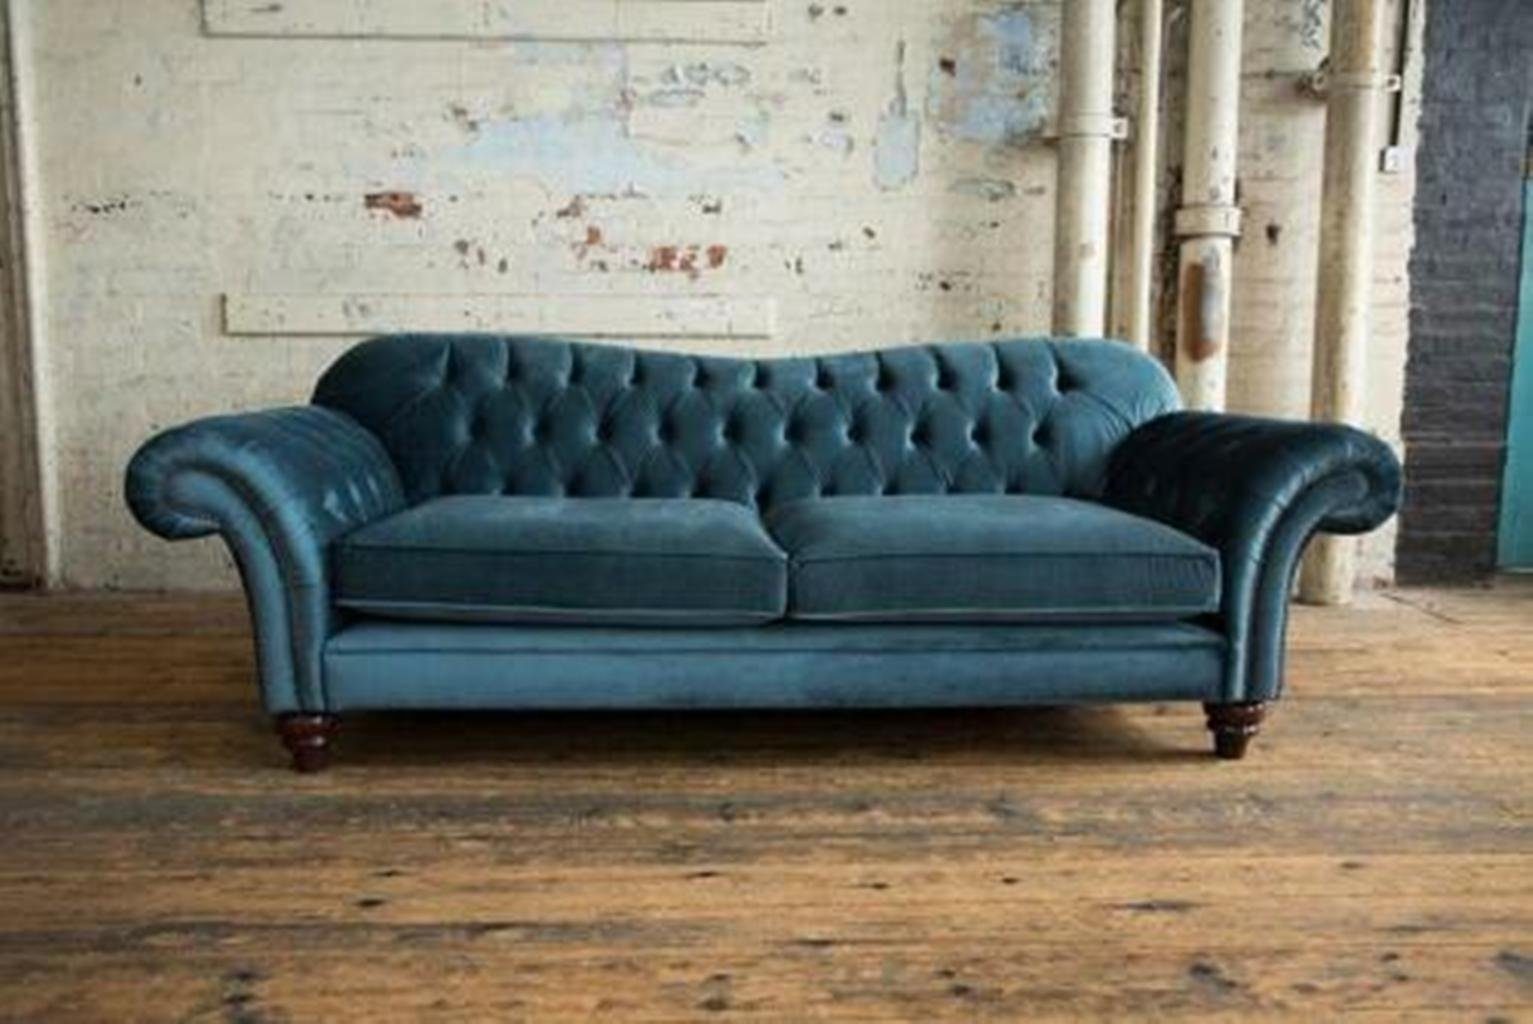 JVmoebel Chesterfield-Sofa, Sofa Luxus Textil Chesterfield Couch Sofas